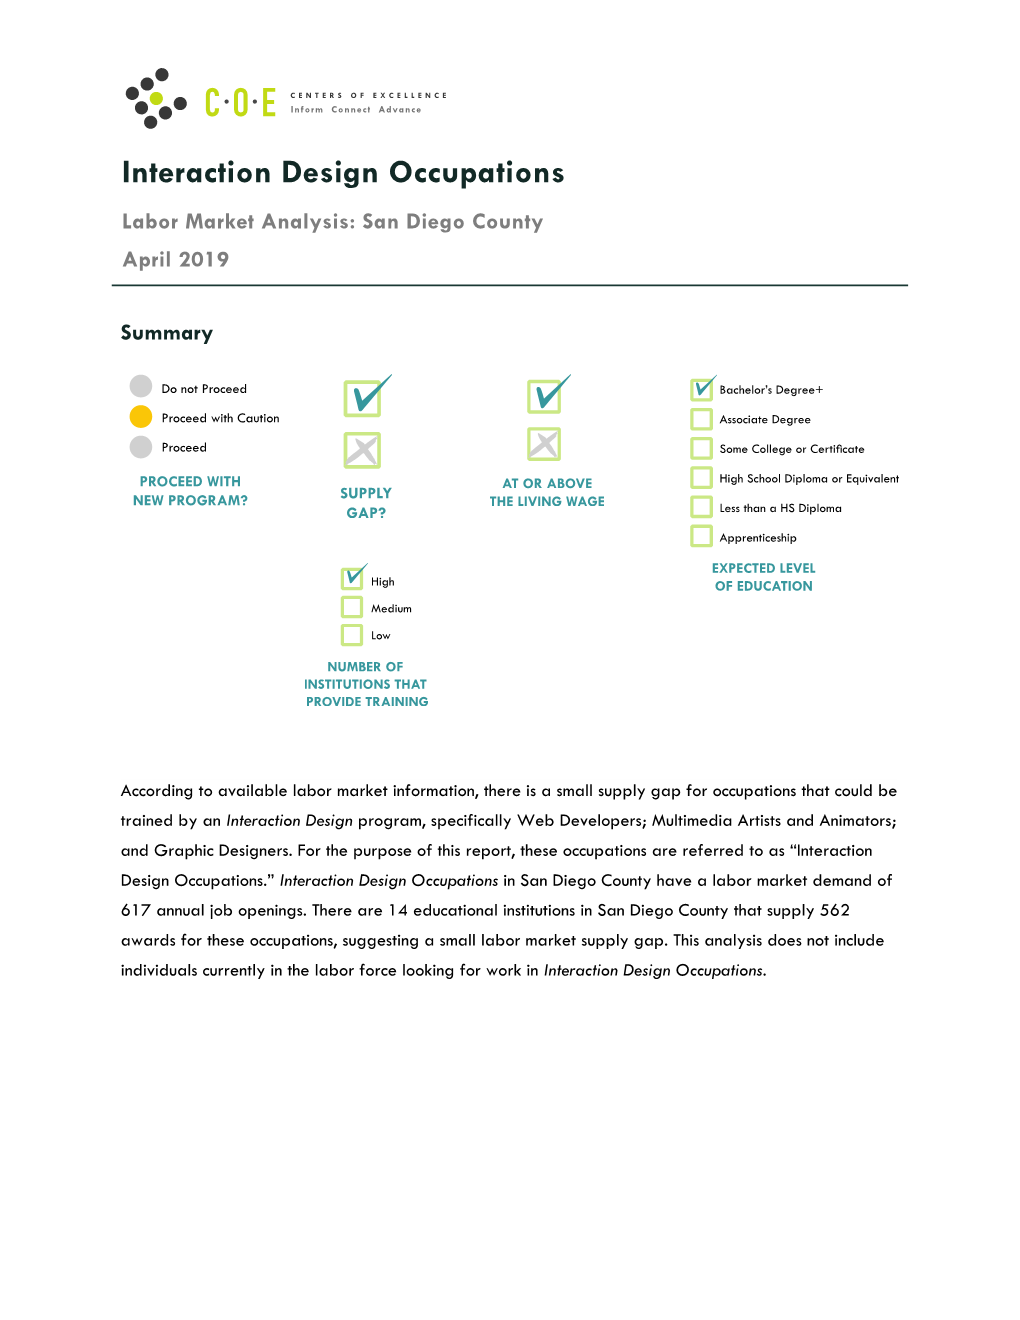 Interaction Design Occupations Labor Market Analysis: San Diego County